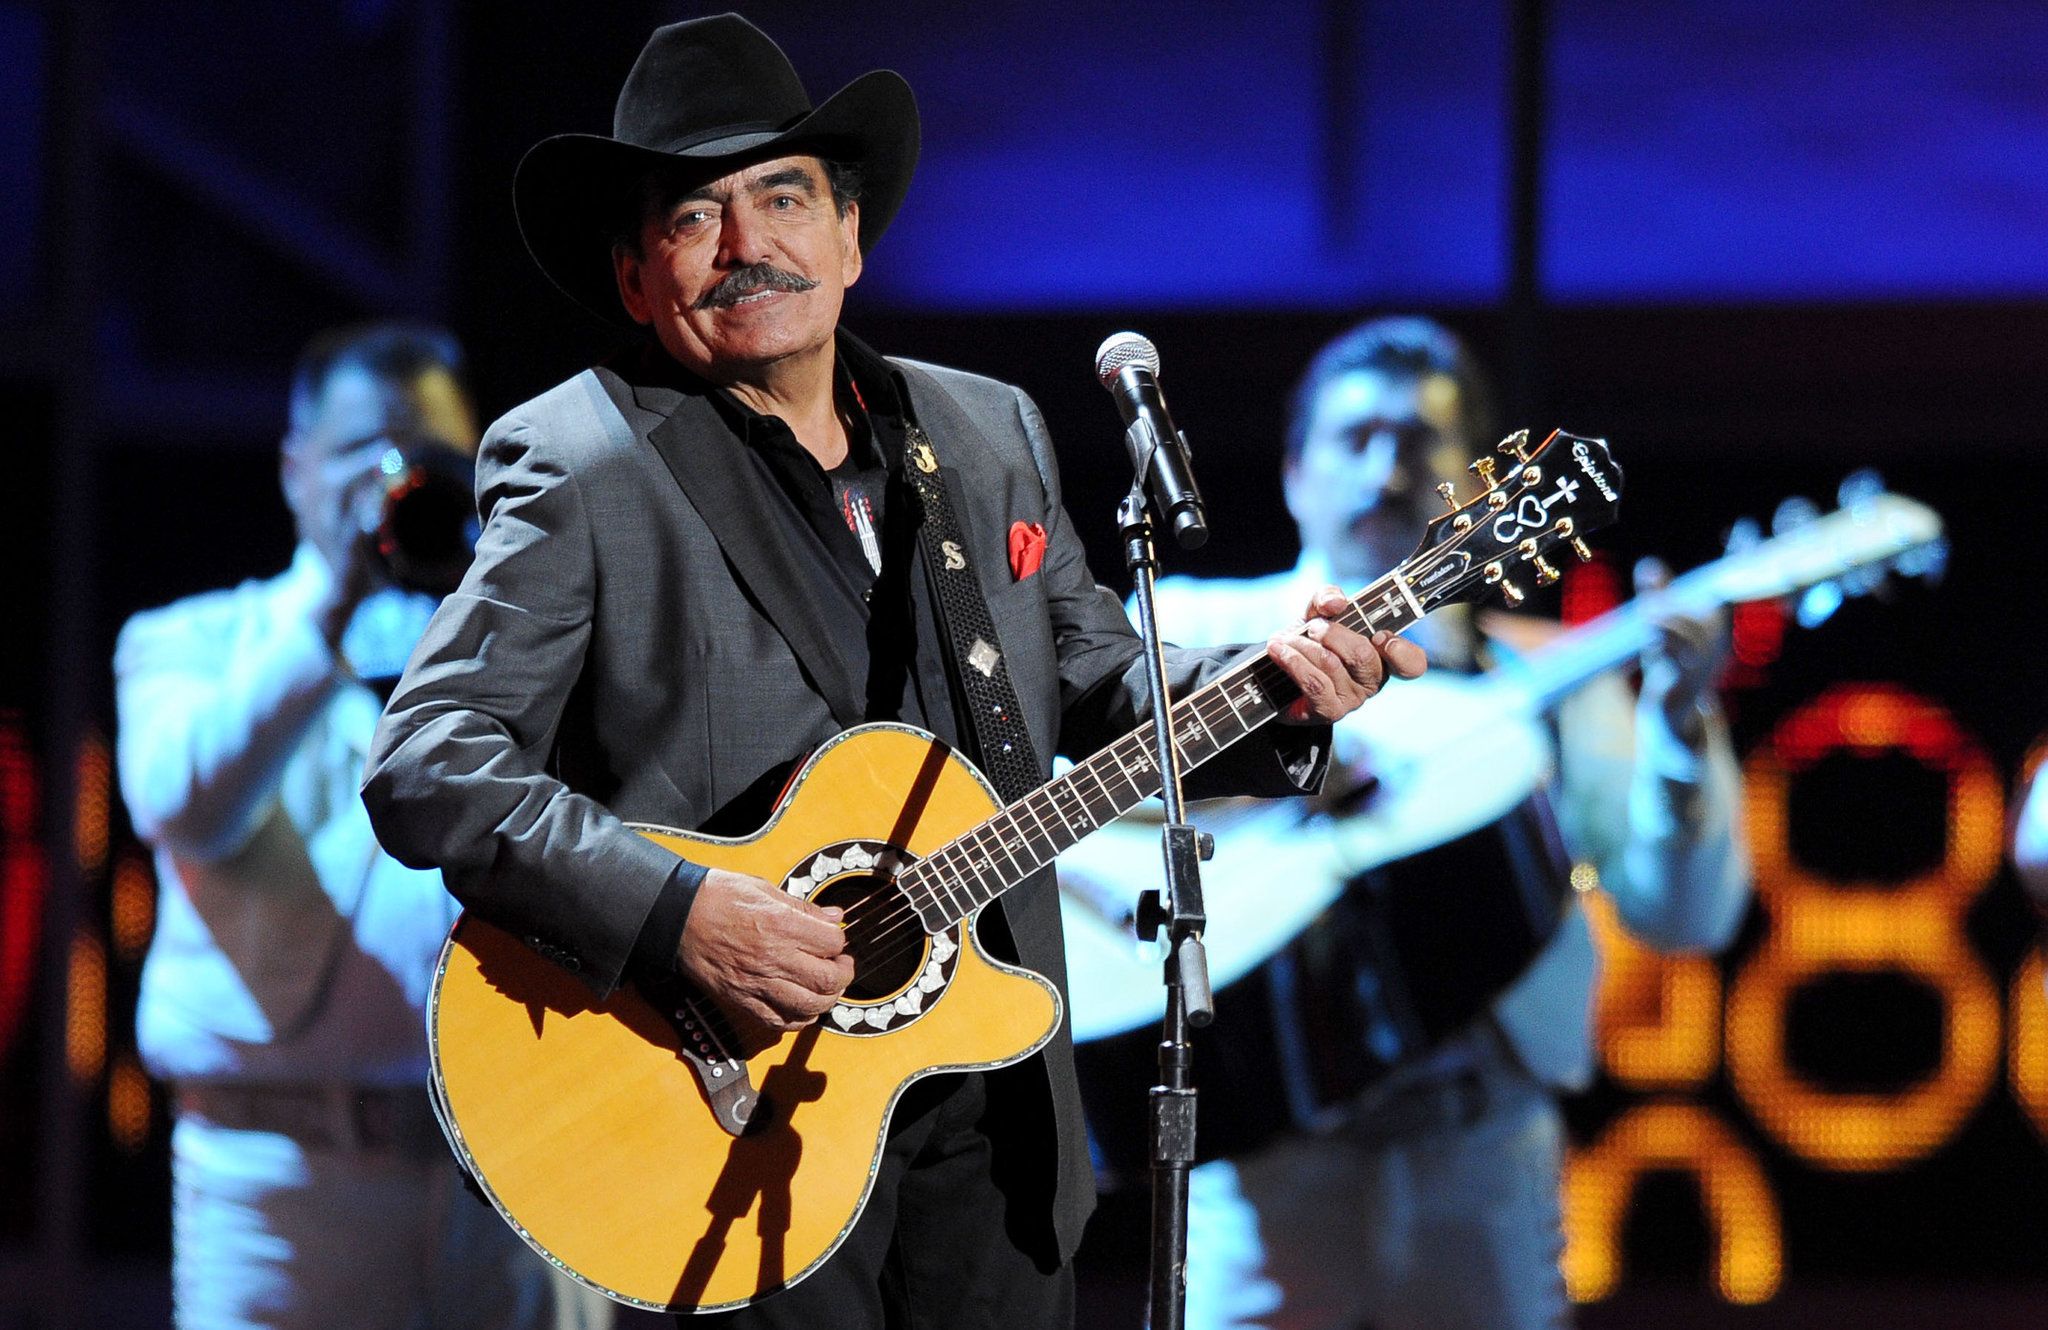 Joan Sebastian, Mexican Singer and Songwriter, Is Dead at 64